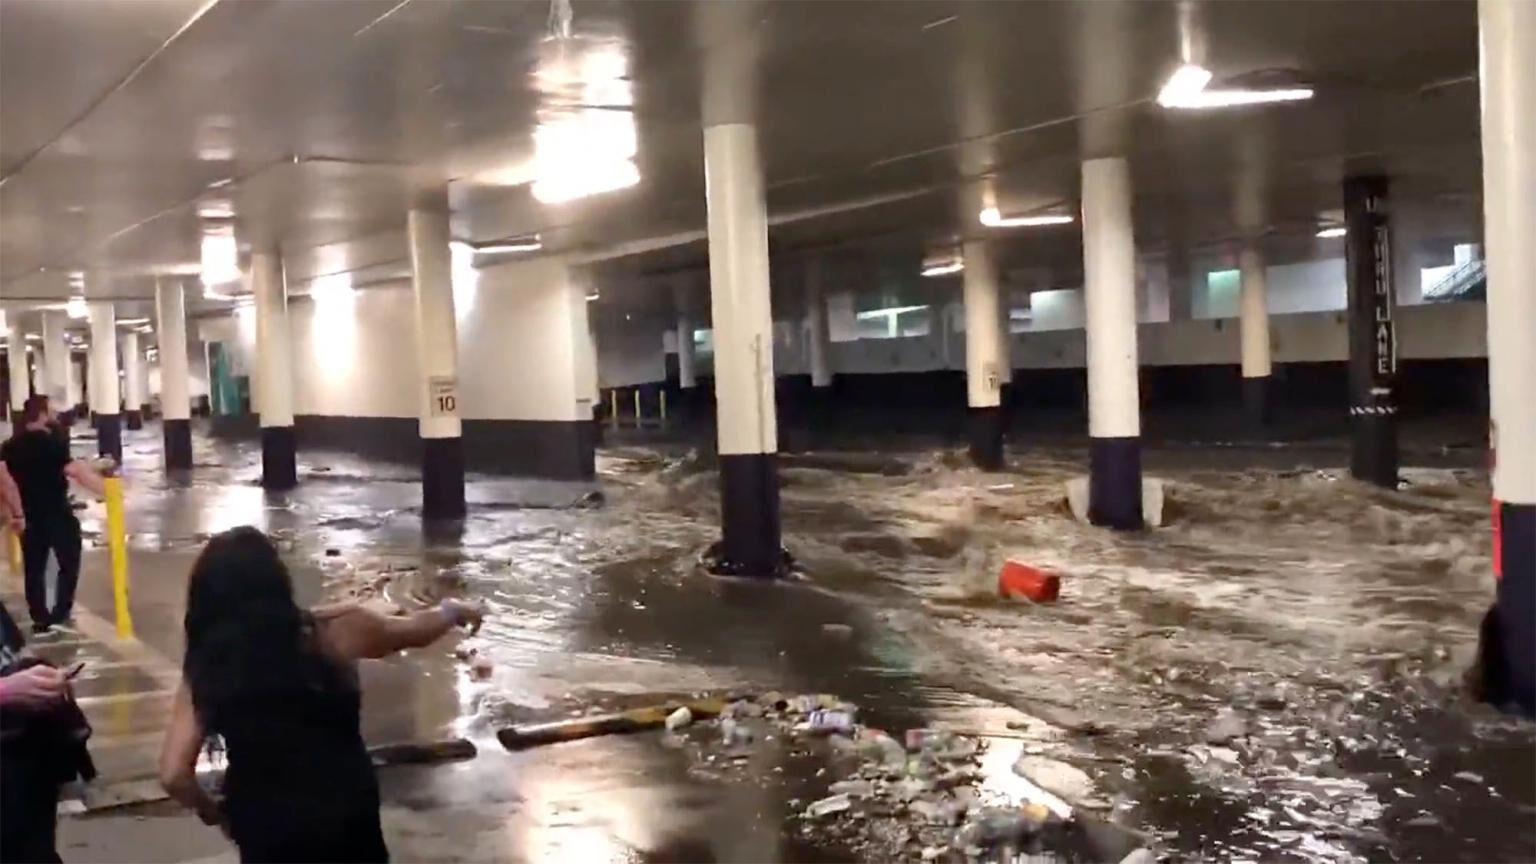 A video shared on Twitter shows intense flooding inside a parking garage on the Strip.